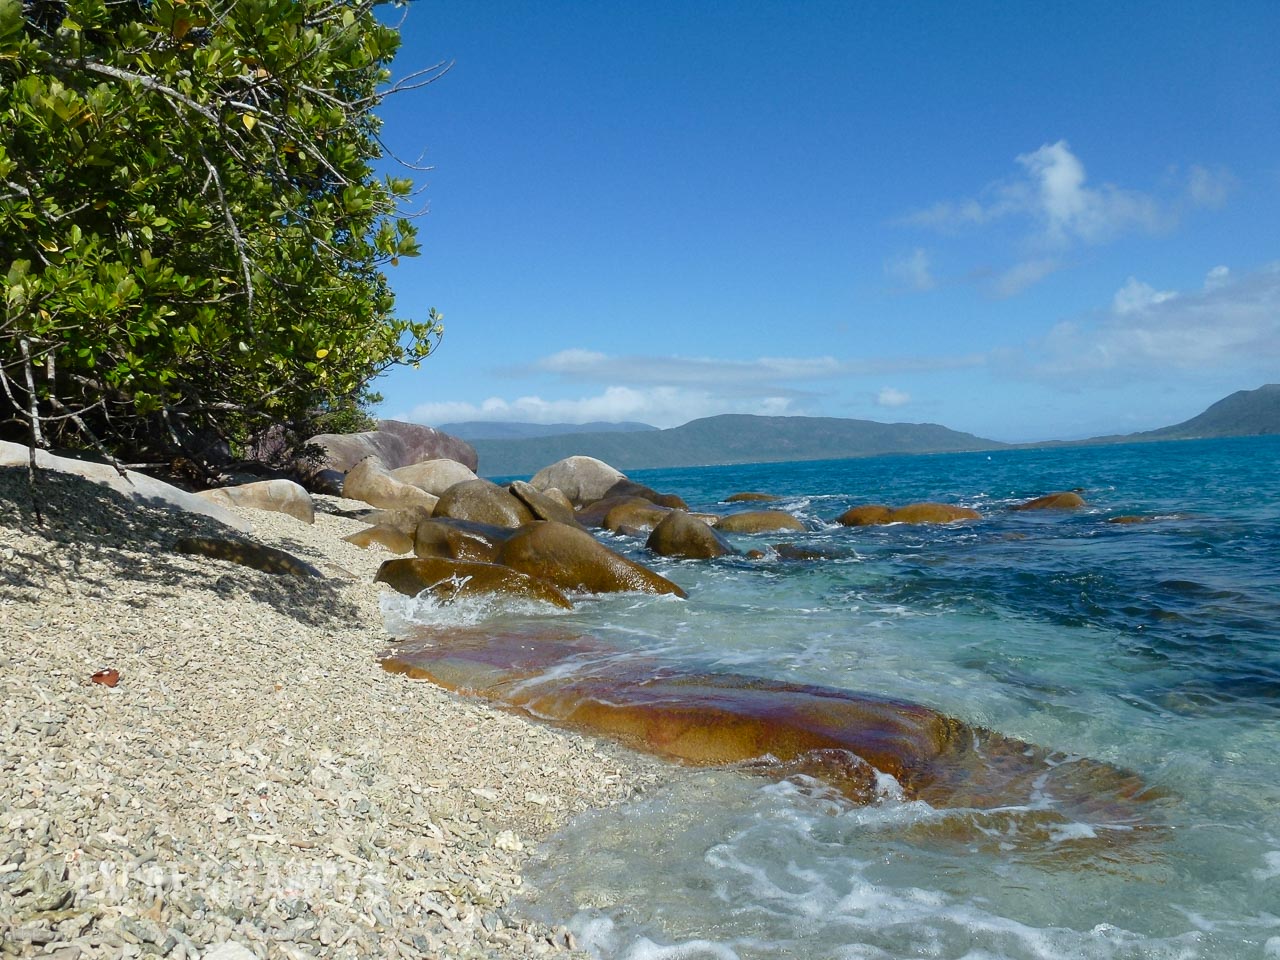 Just 45 minutes from Cairns you find the crystal clear waters of Fitzroy Island. The coral rubble beaches lead you to perfect snorkelling right from the beach. 